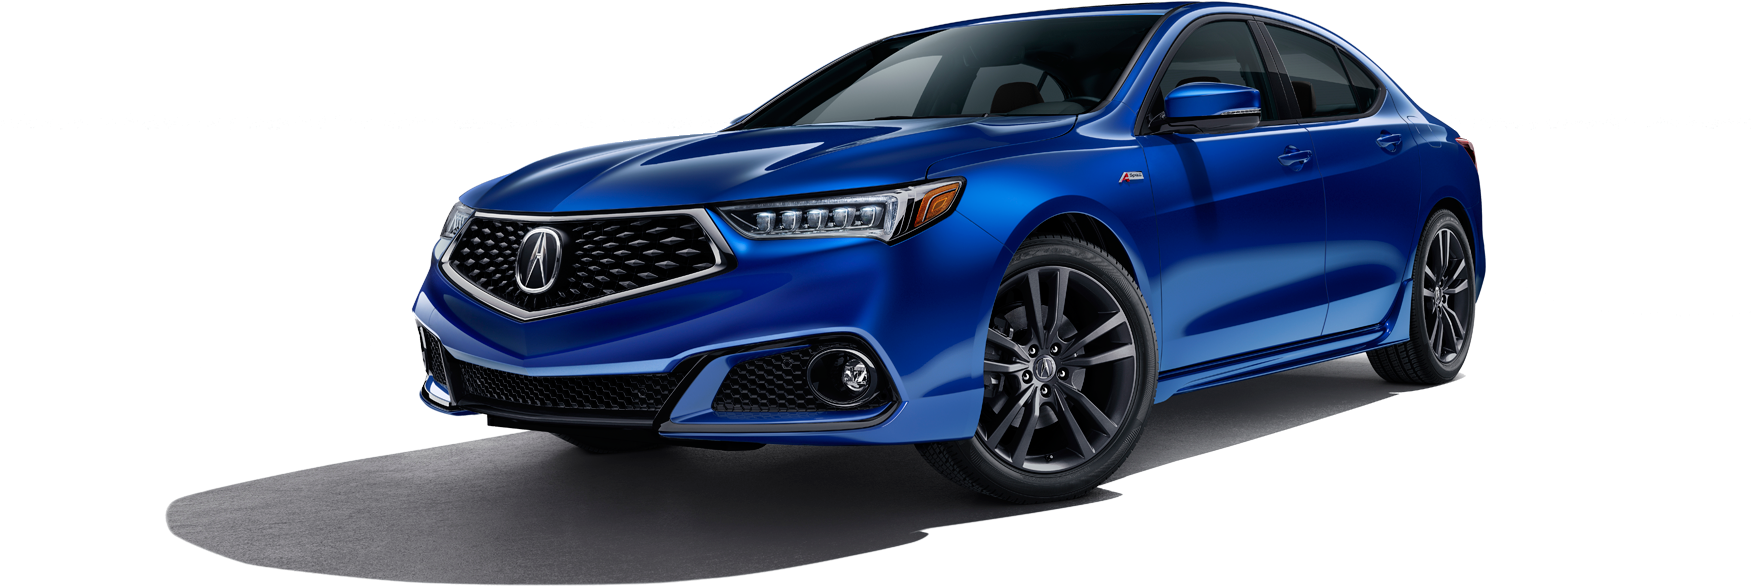 Acura TLX PNG Free File Download